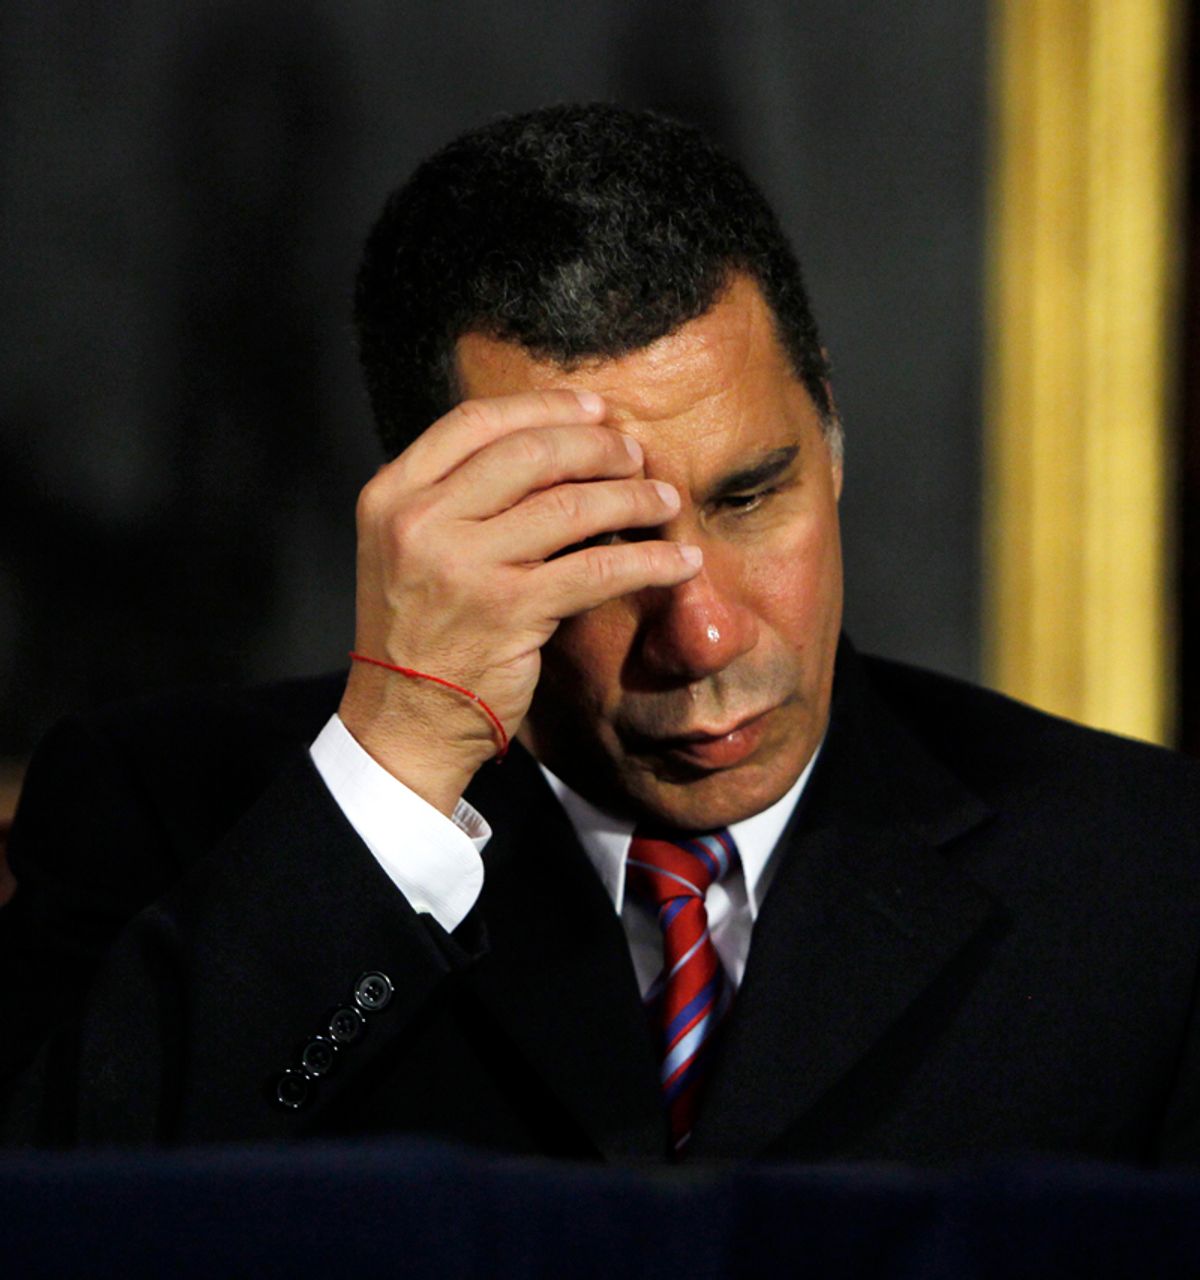 New York Gov. David Paterson listens to a speaker during a legislative leaders budget meeting at the Capitol in Albany, N.Y., on Wednesday, June 16, 2010.  Paterson has given lawmakers a June 28 deadline to complete the state budget, which was due on April 1.  (AP Photo/Mike Groll) (Mike Groll)